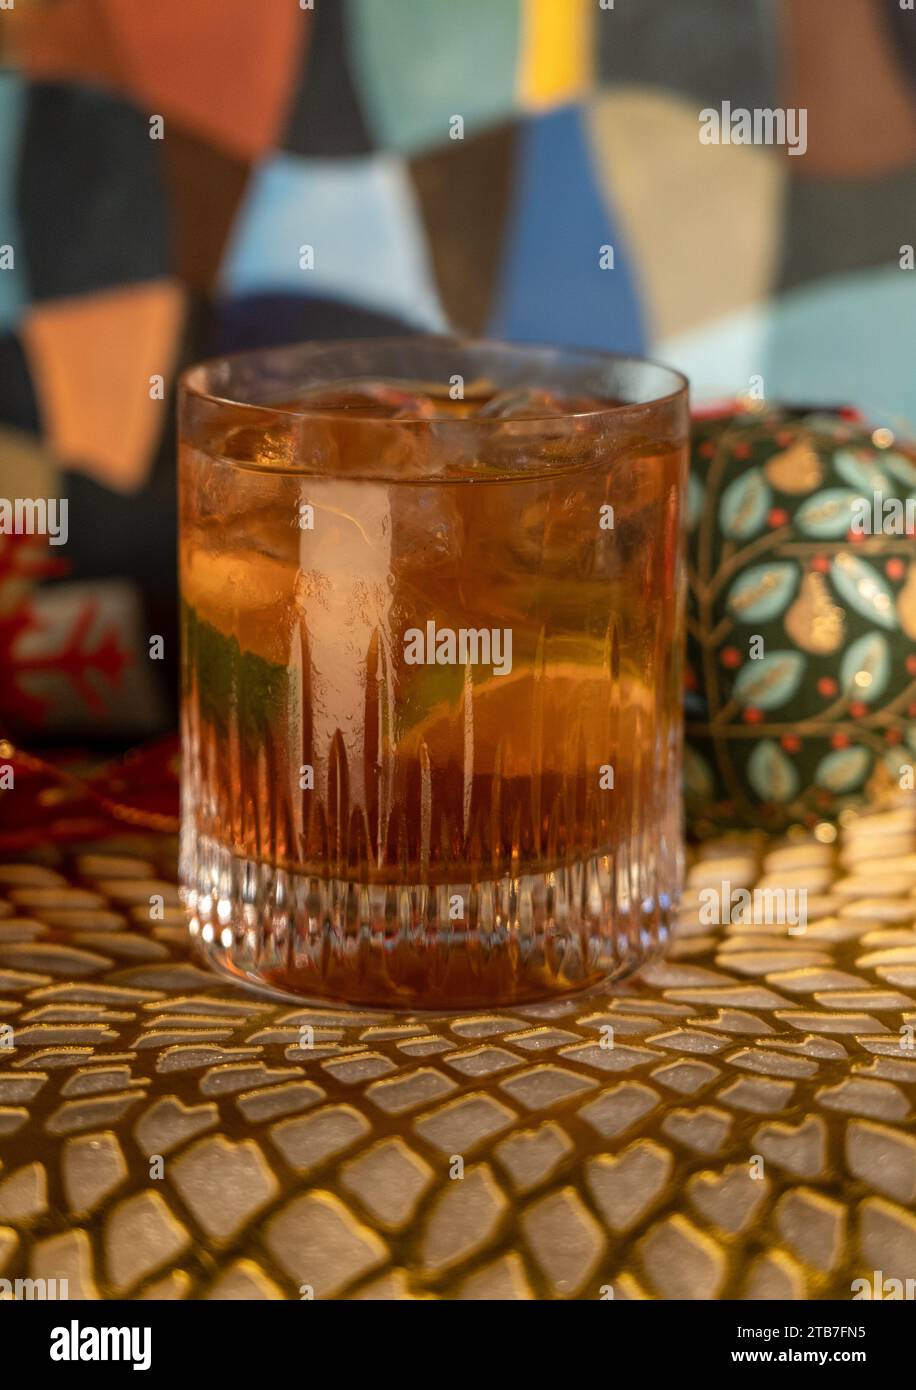 https://c8.alamy.com/comp/2TB7FN5/tequila-negroni-in-low-ball-glass-with-ice-and-lime-in-front-of-christmas-decorations-including-baubles-and-red-ribbon-on-gold-mat-2TB7FN5.jpg